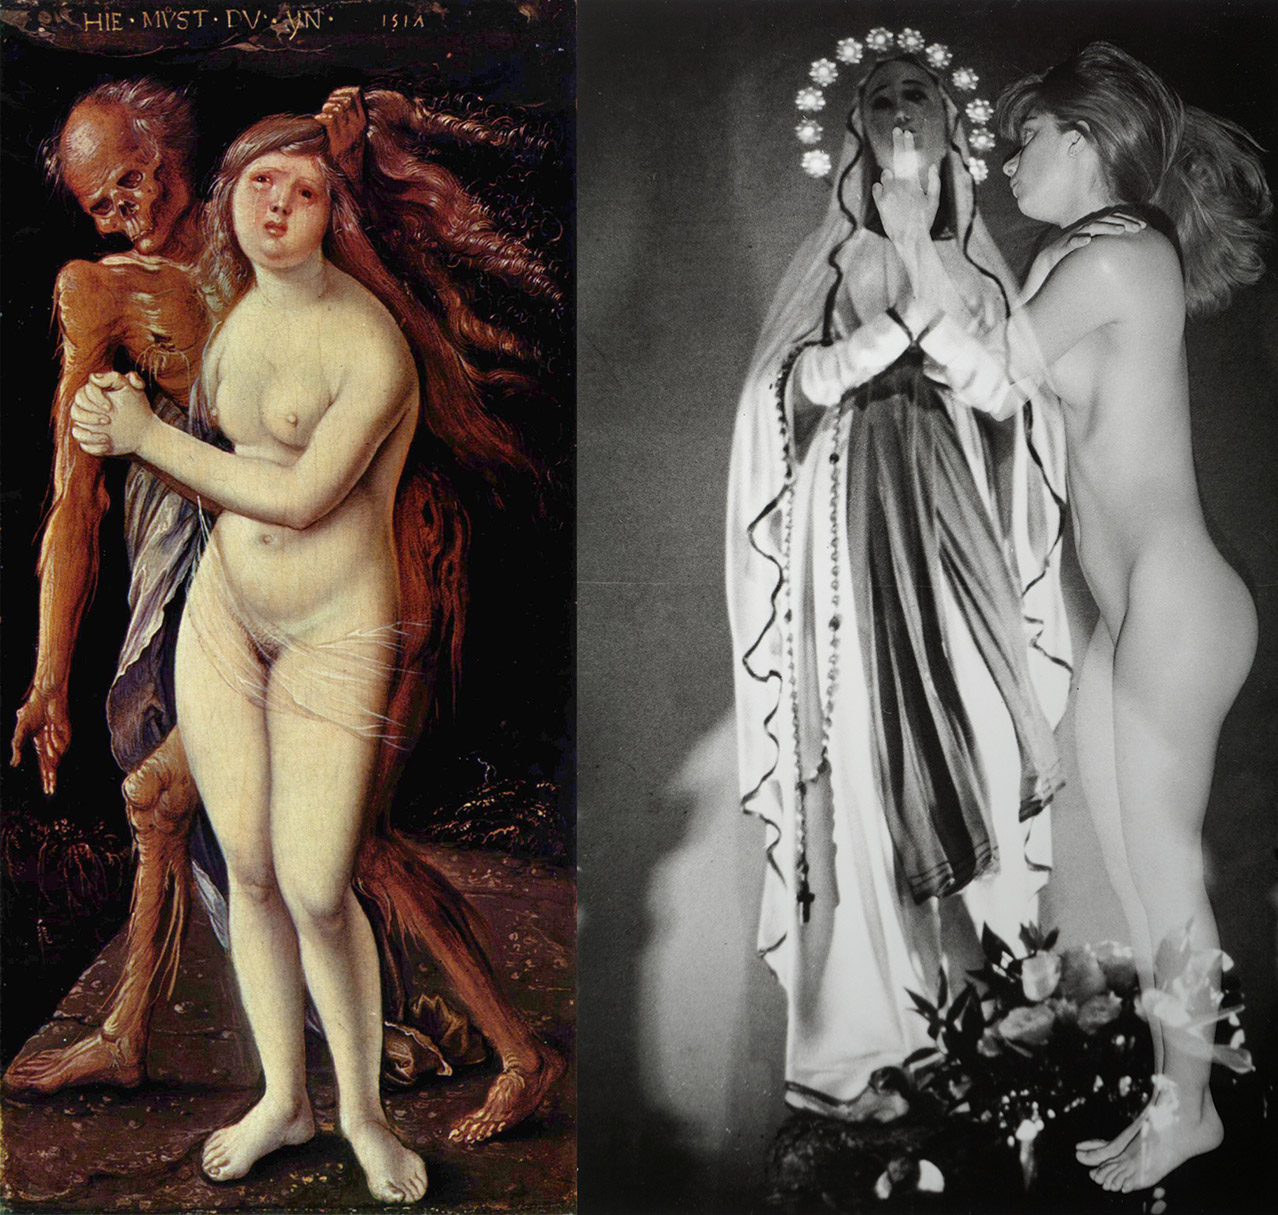 Image with Hans Baldung Grien and me blog Thom Puckey